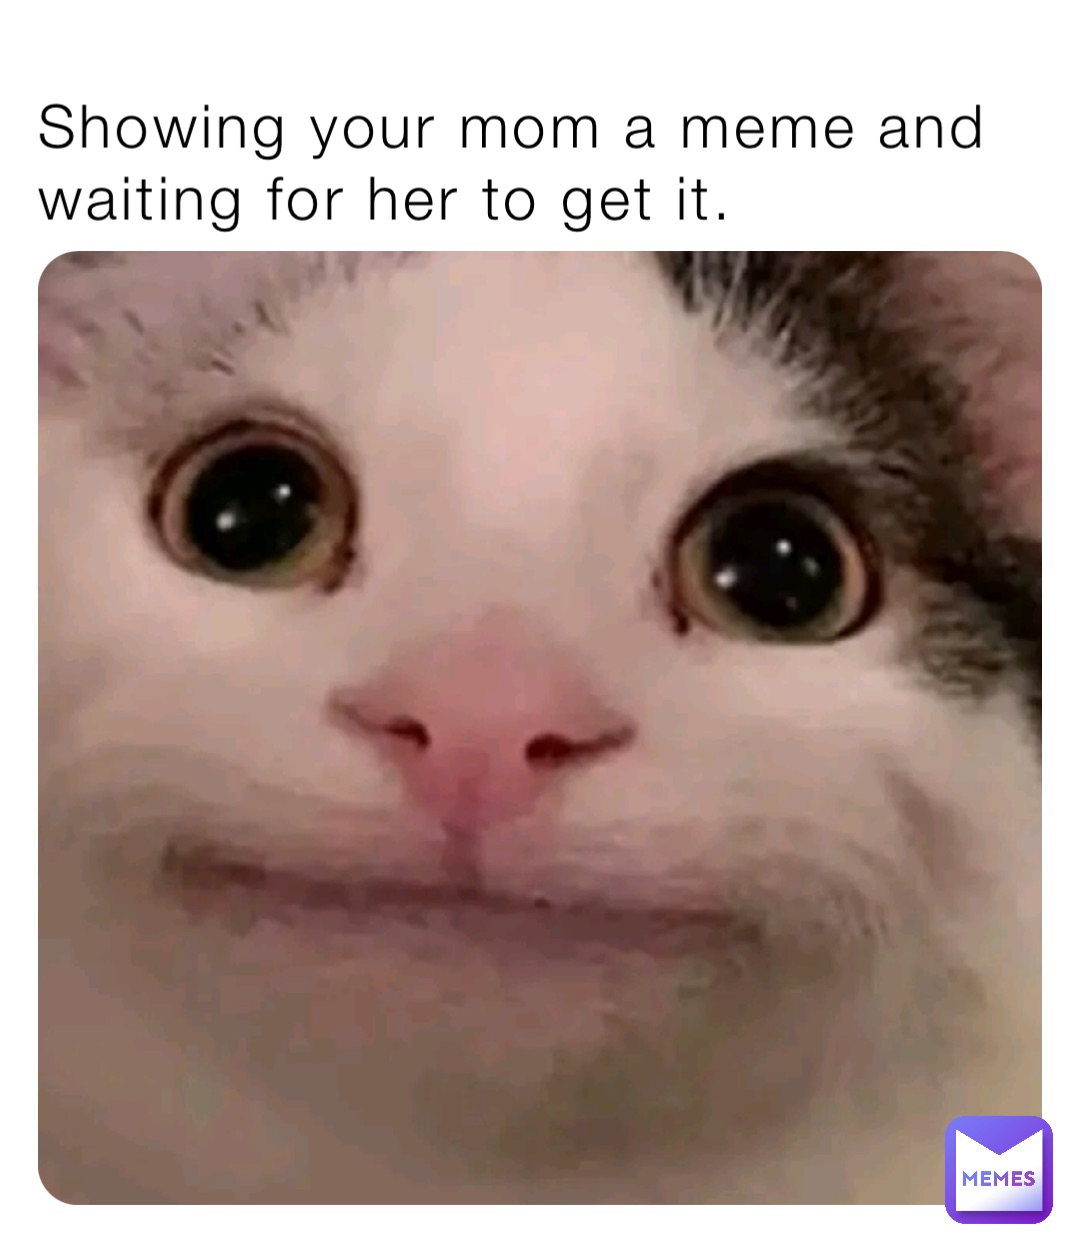 Showing your mom a meme and waiting for her to get it.